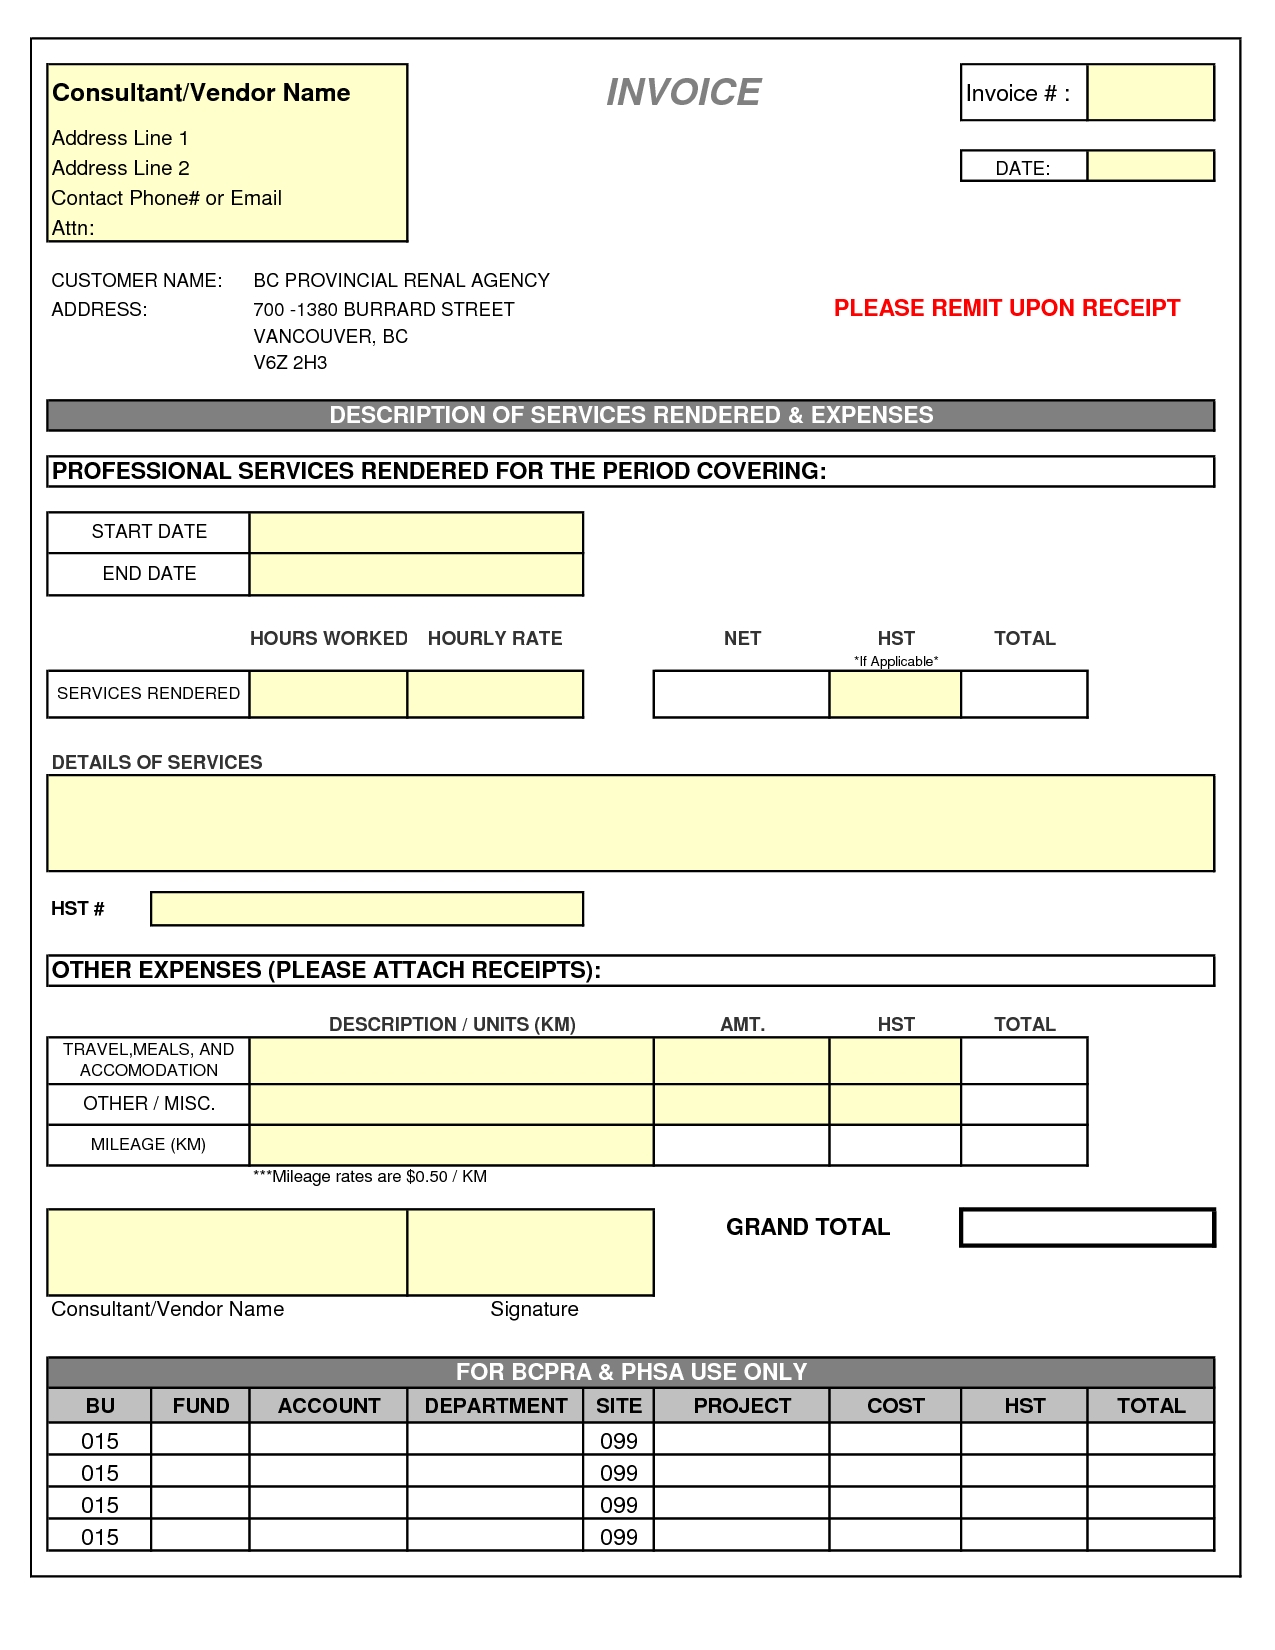 business consultant invoice template danaspegtop it consultant invoice template